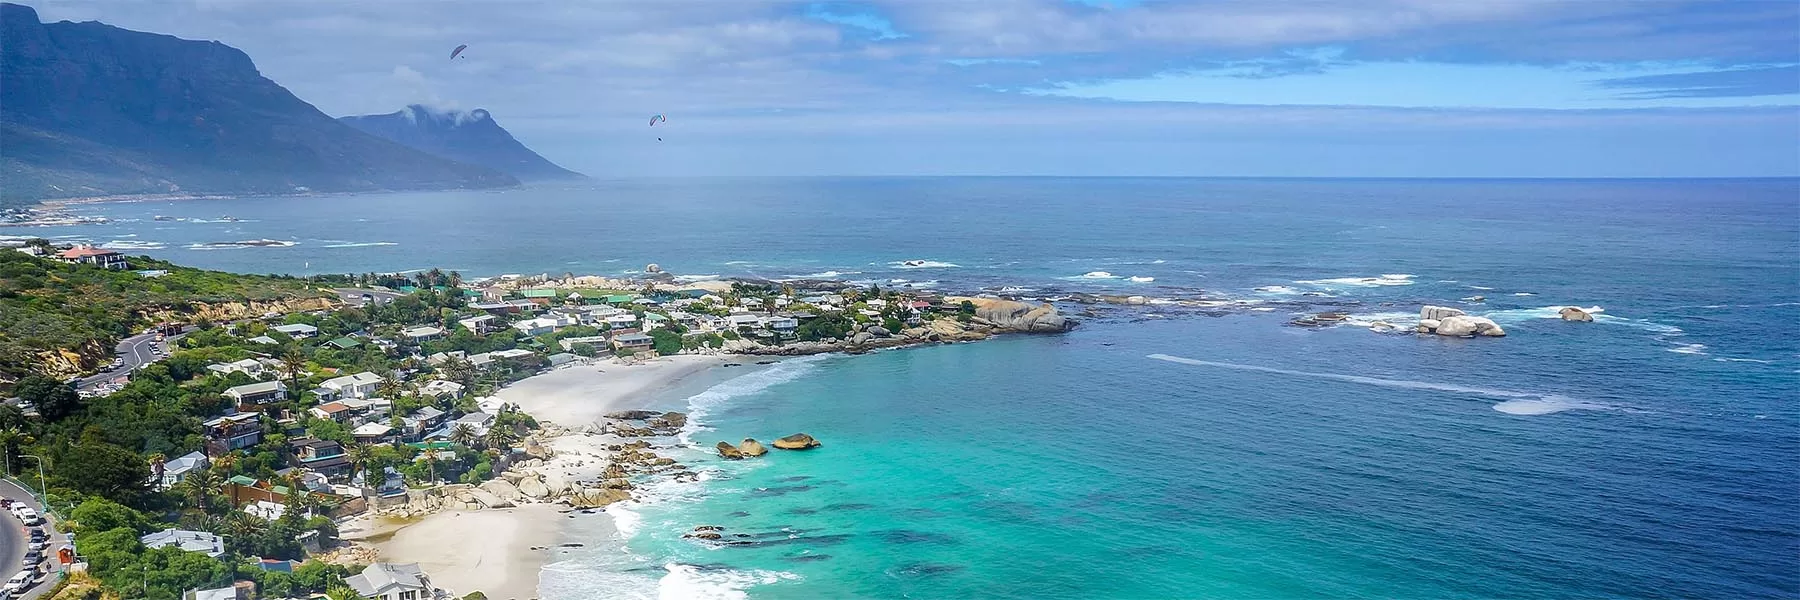 Best beaches of South Africa